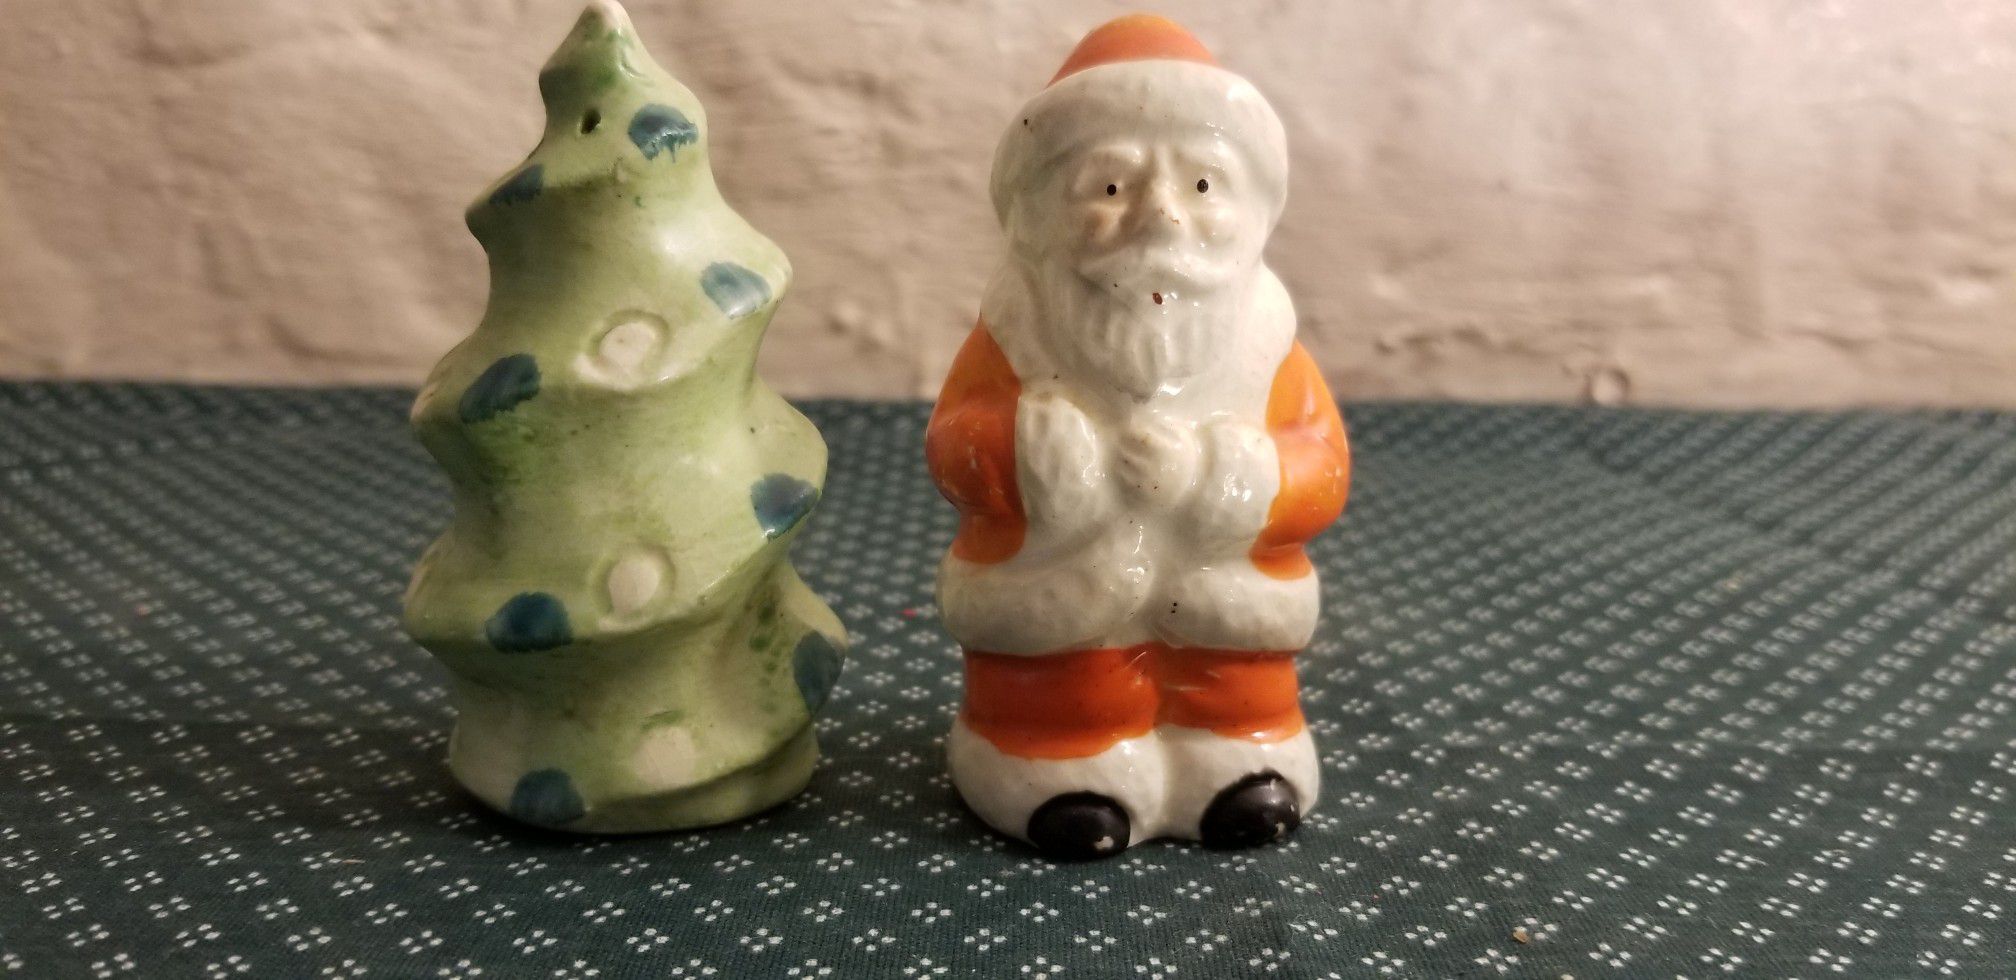 Vintage Santa Claus In Orange And Holiday Tree Christmas Salt and Pepper Shakers